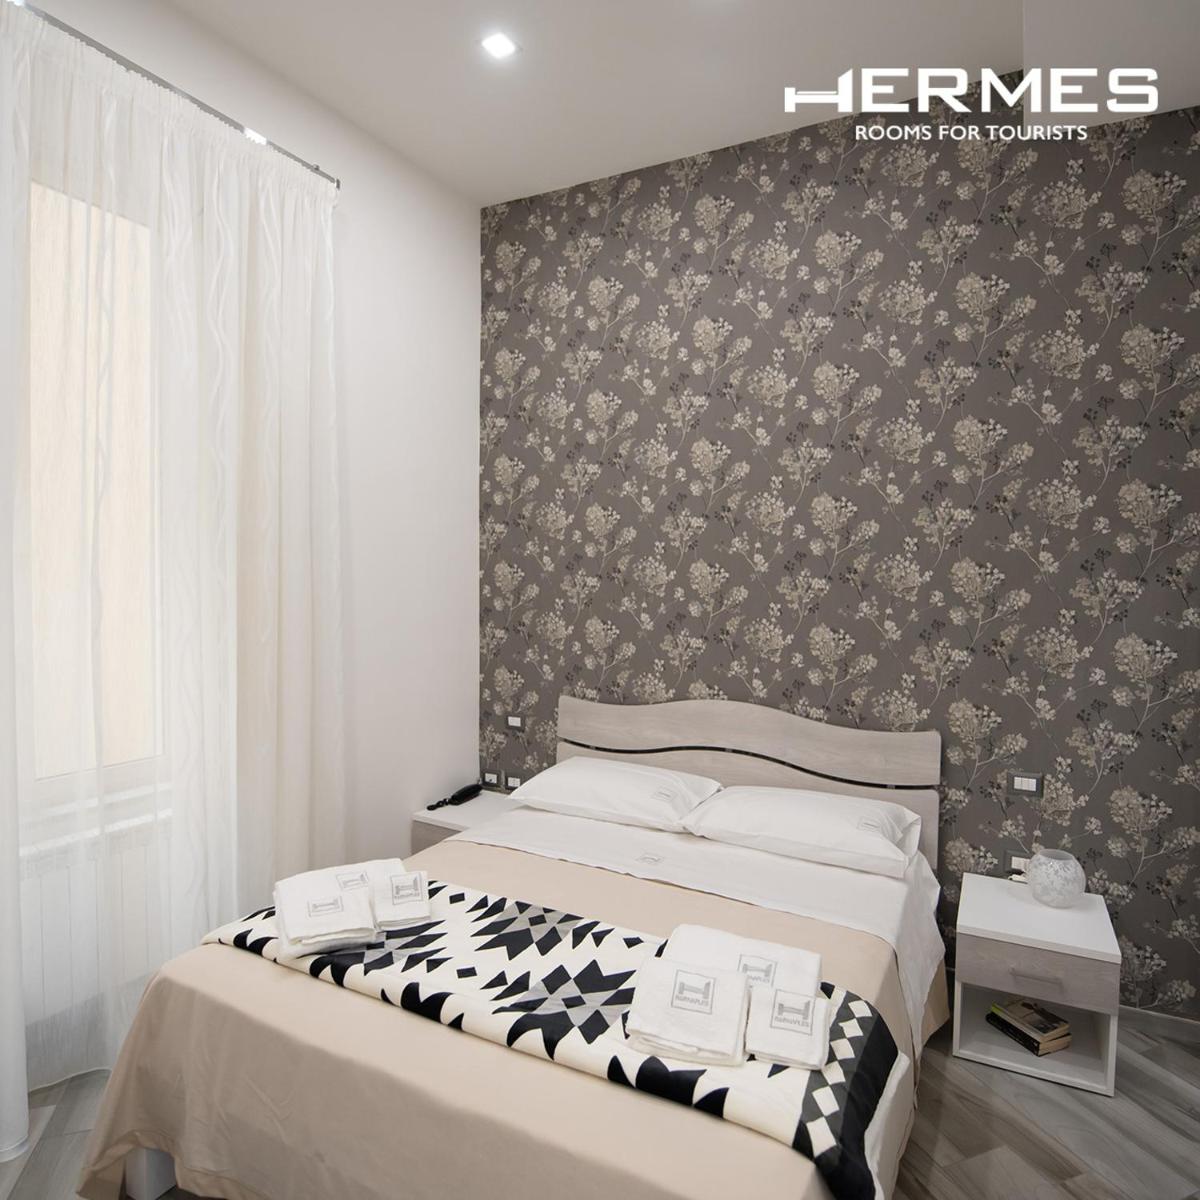 Photo - Hermes rooms for tourists